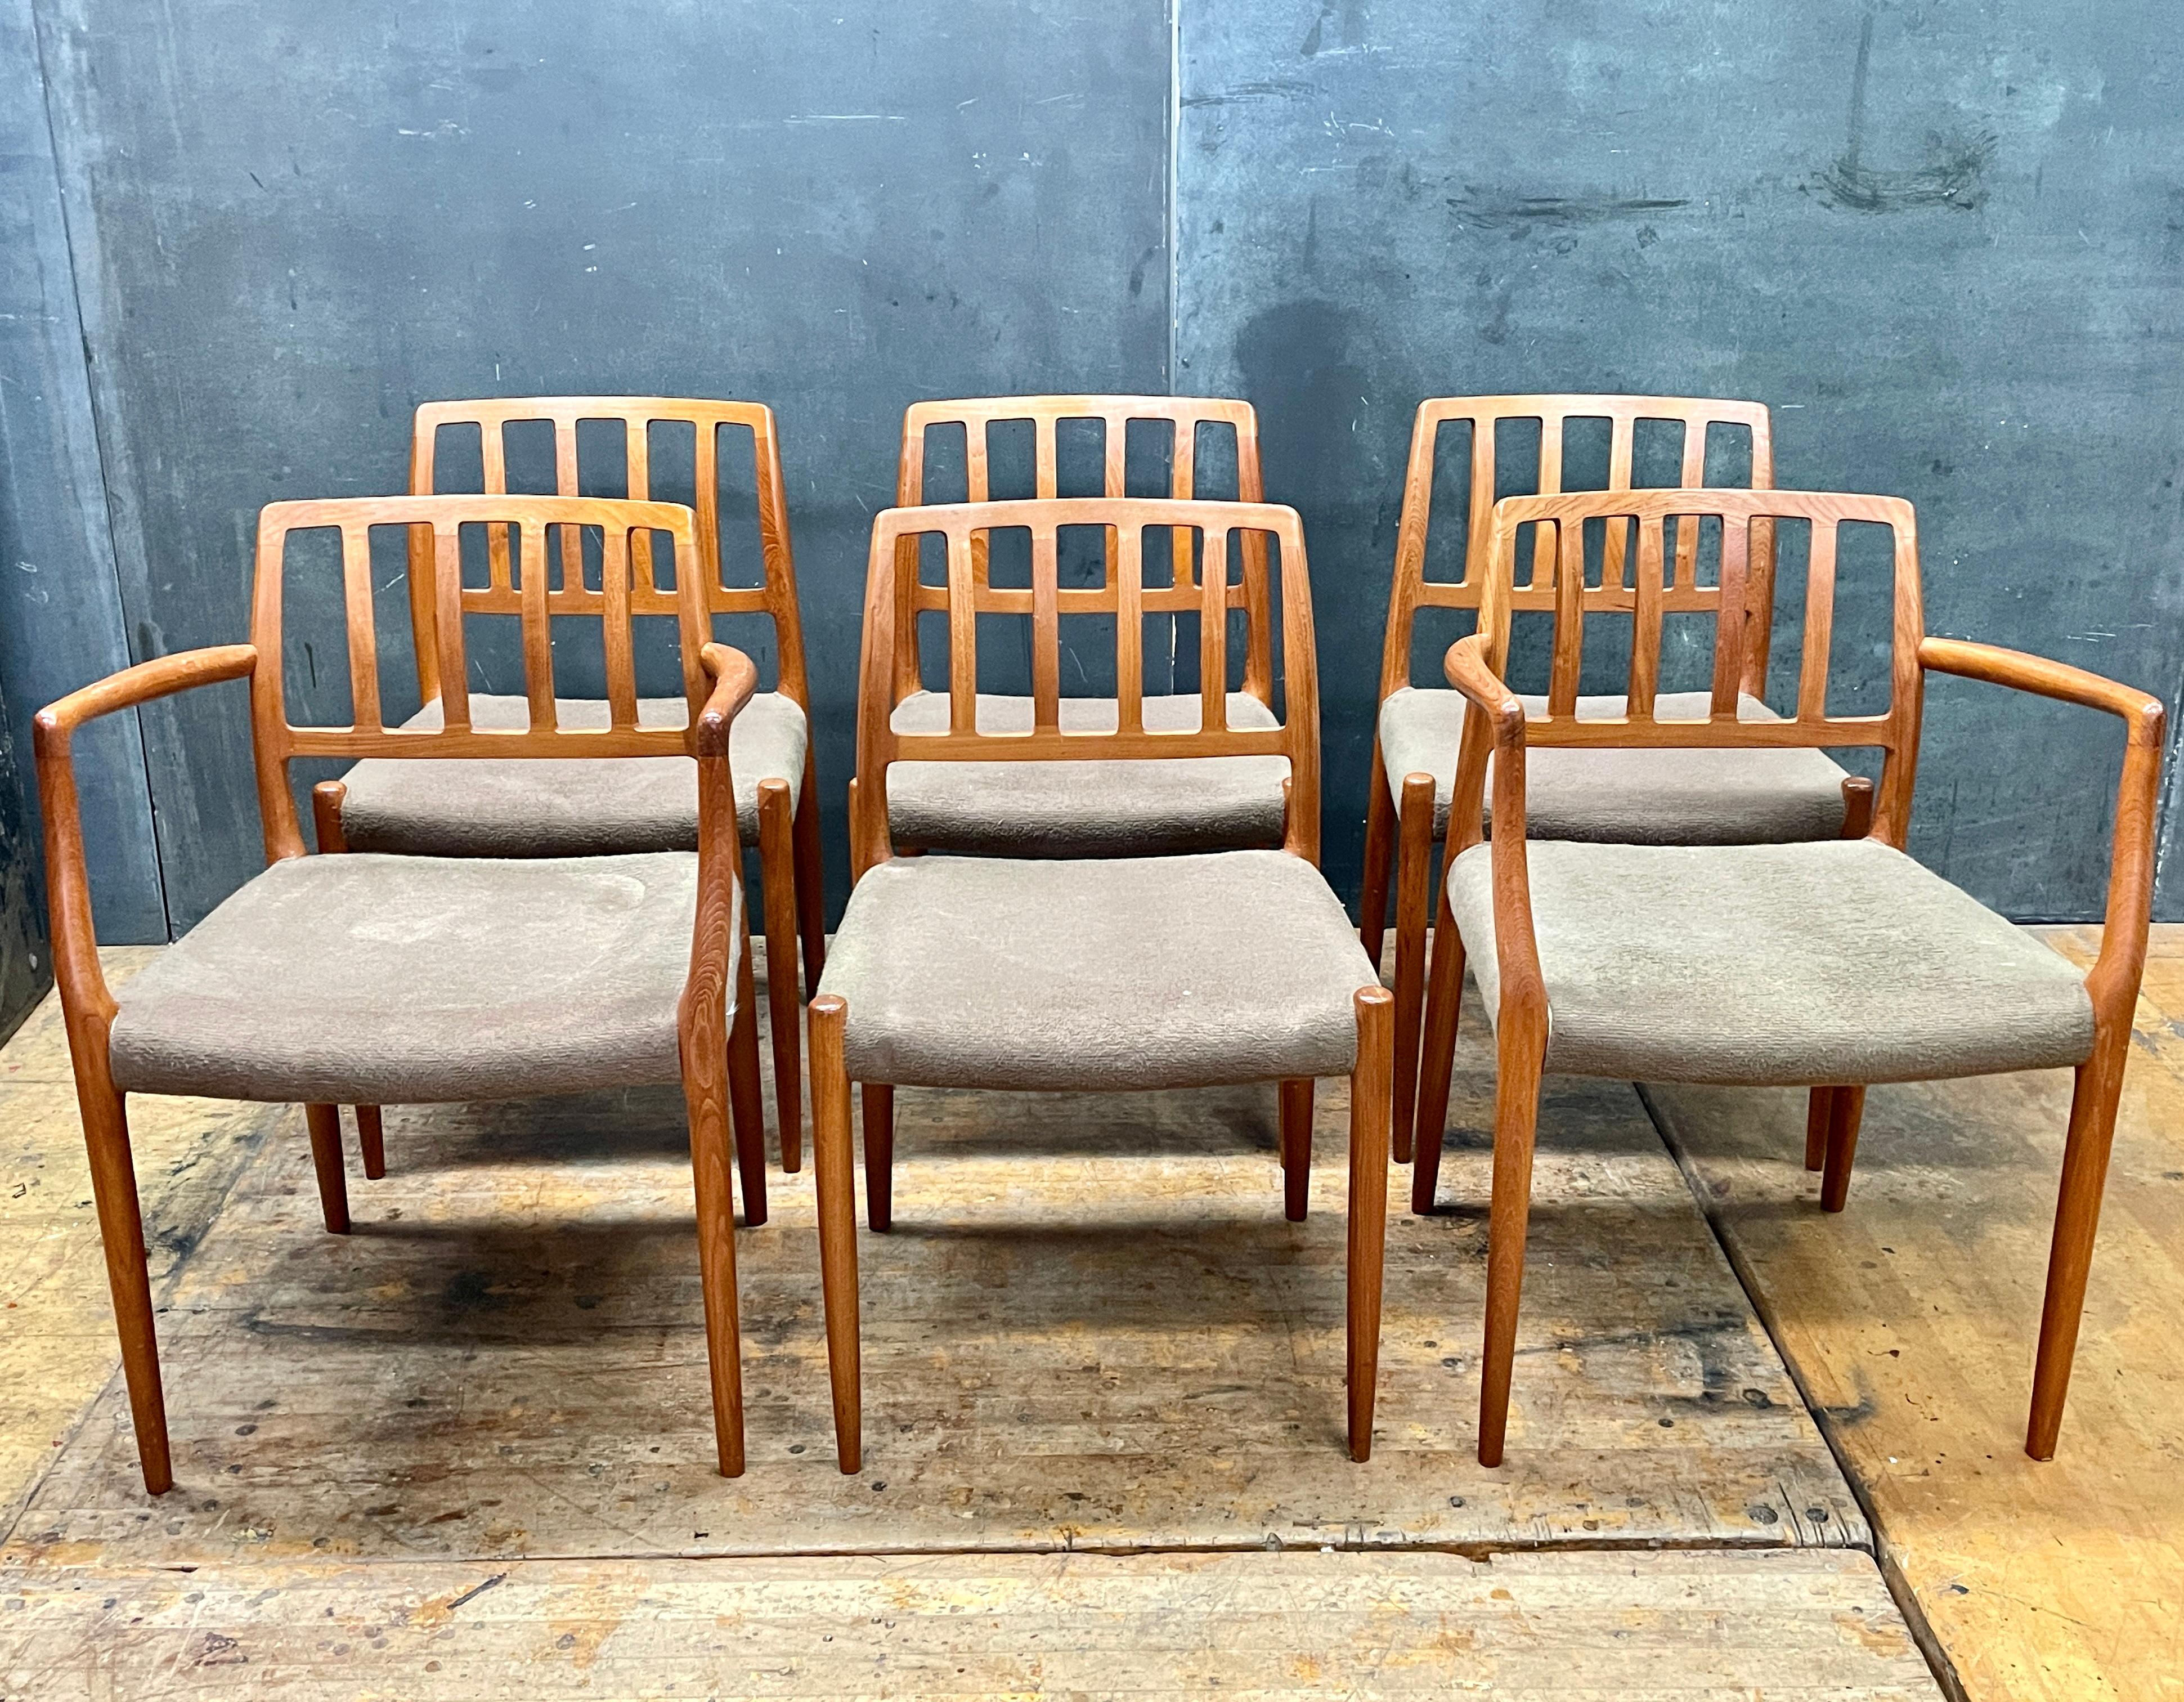 2 armchairs, and 4 side chairs. The teak frames are strong and not loose. However, the upholstery is a old and soiled, and would need to be cleaned or recovered.

Measures: W 19.69 x D 20.08 x H 31.5 in. 
Seat H 17.32 in.